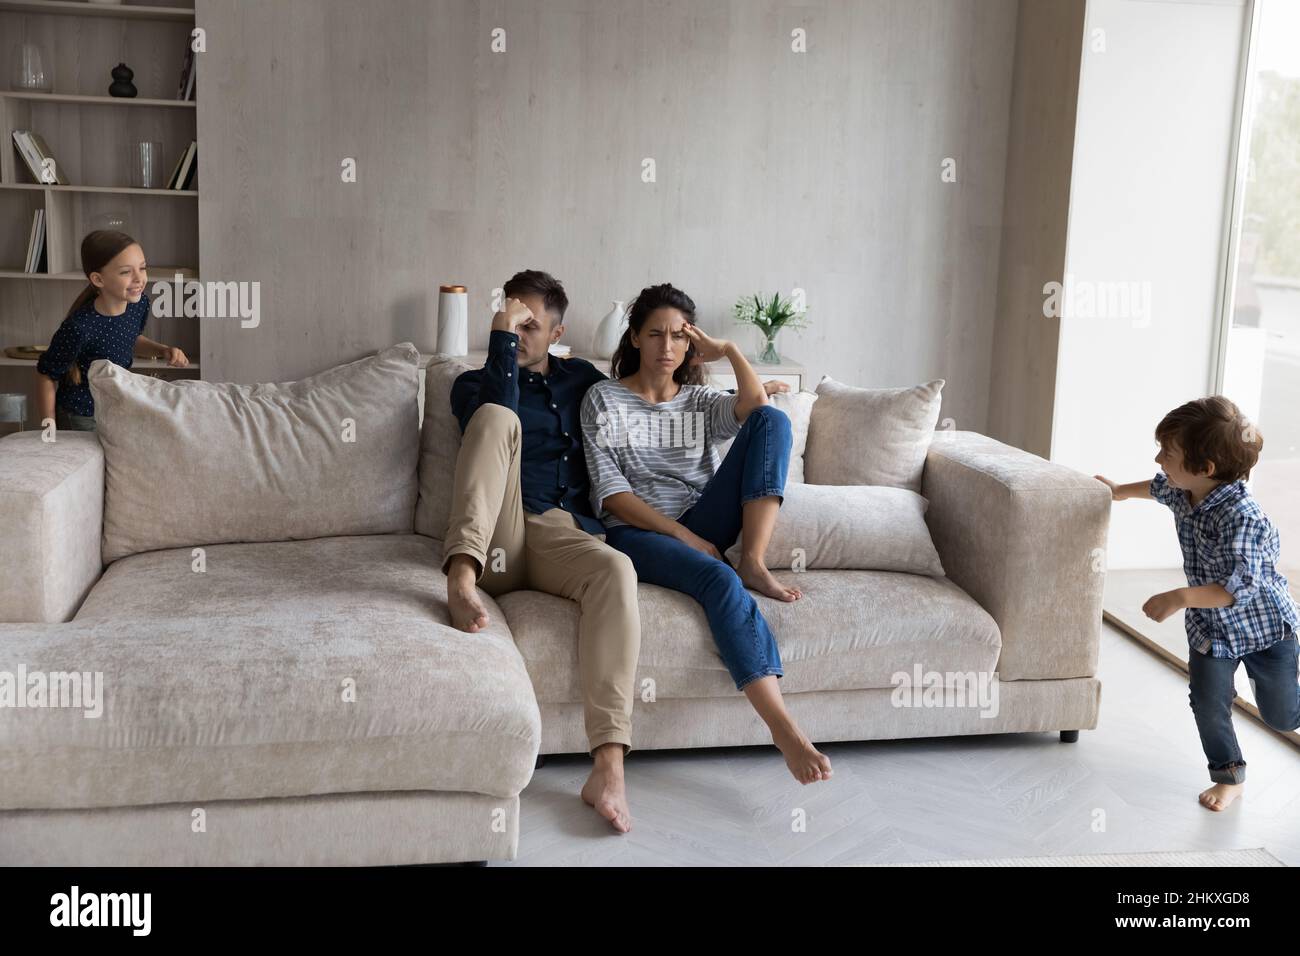 Tired parents sitting on couch while noisy kids running around Stock Photo